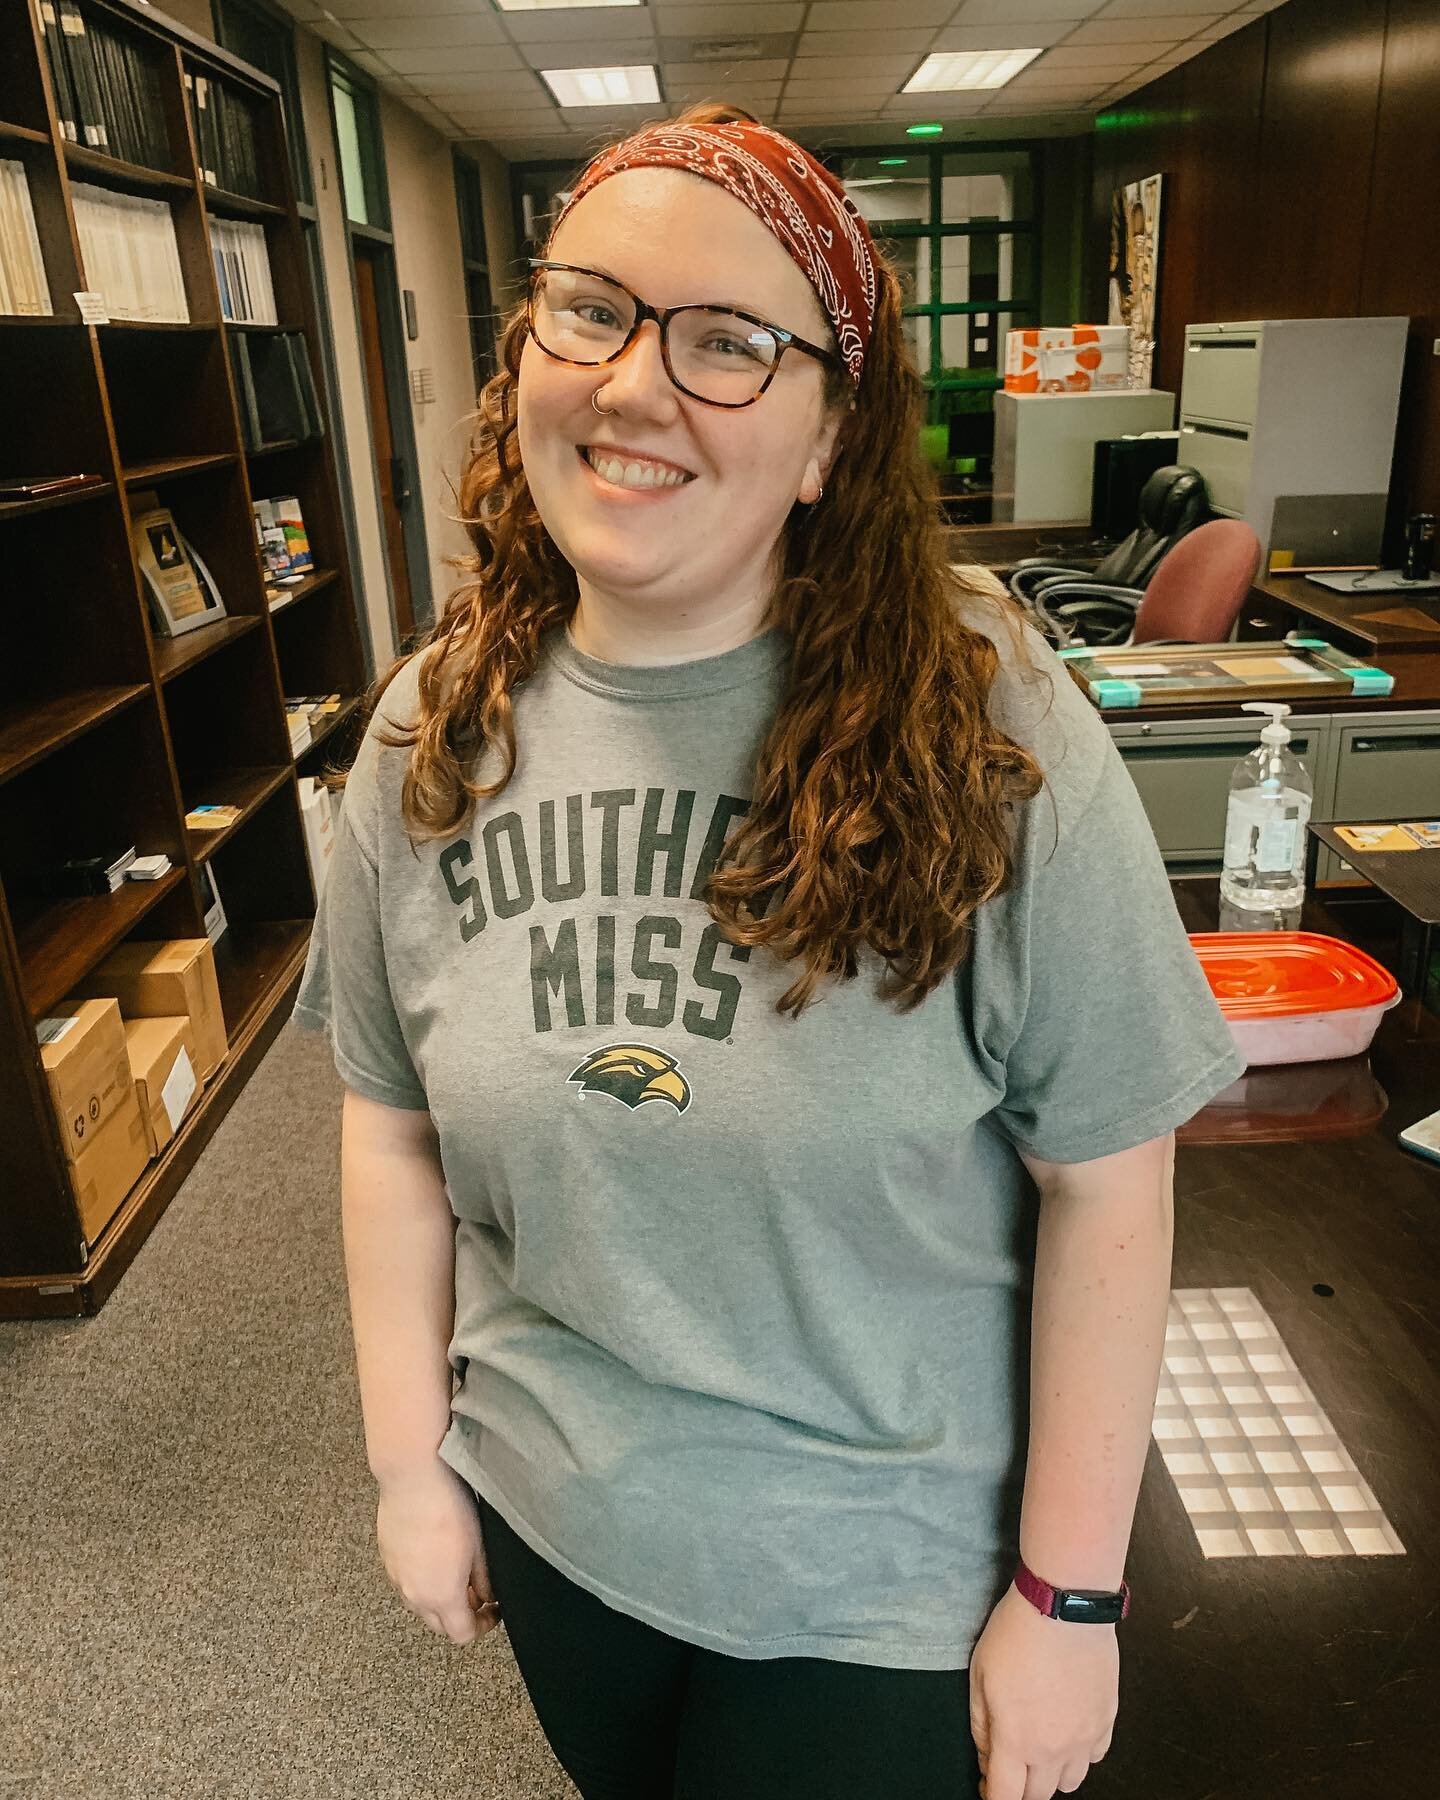 ✨GRAD STUDENT SHOUT OUT✨
This is the smile of @penelopejankoski who just landed a Mississippi Space Grant Consortium (MSSGC) Fellowship! This means @penelopejankoski will be working with a local K-12 teacher in a STEM area for ten hours per week duri